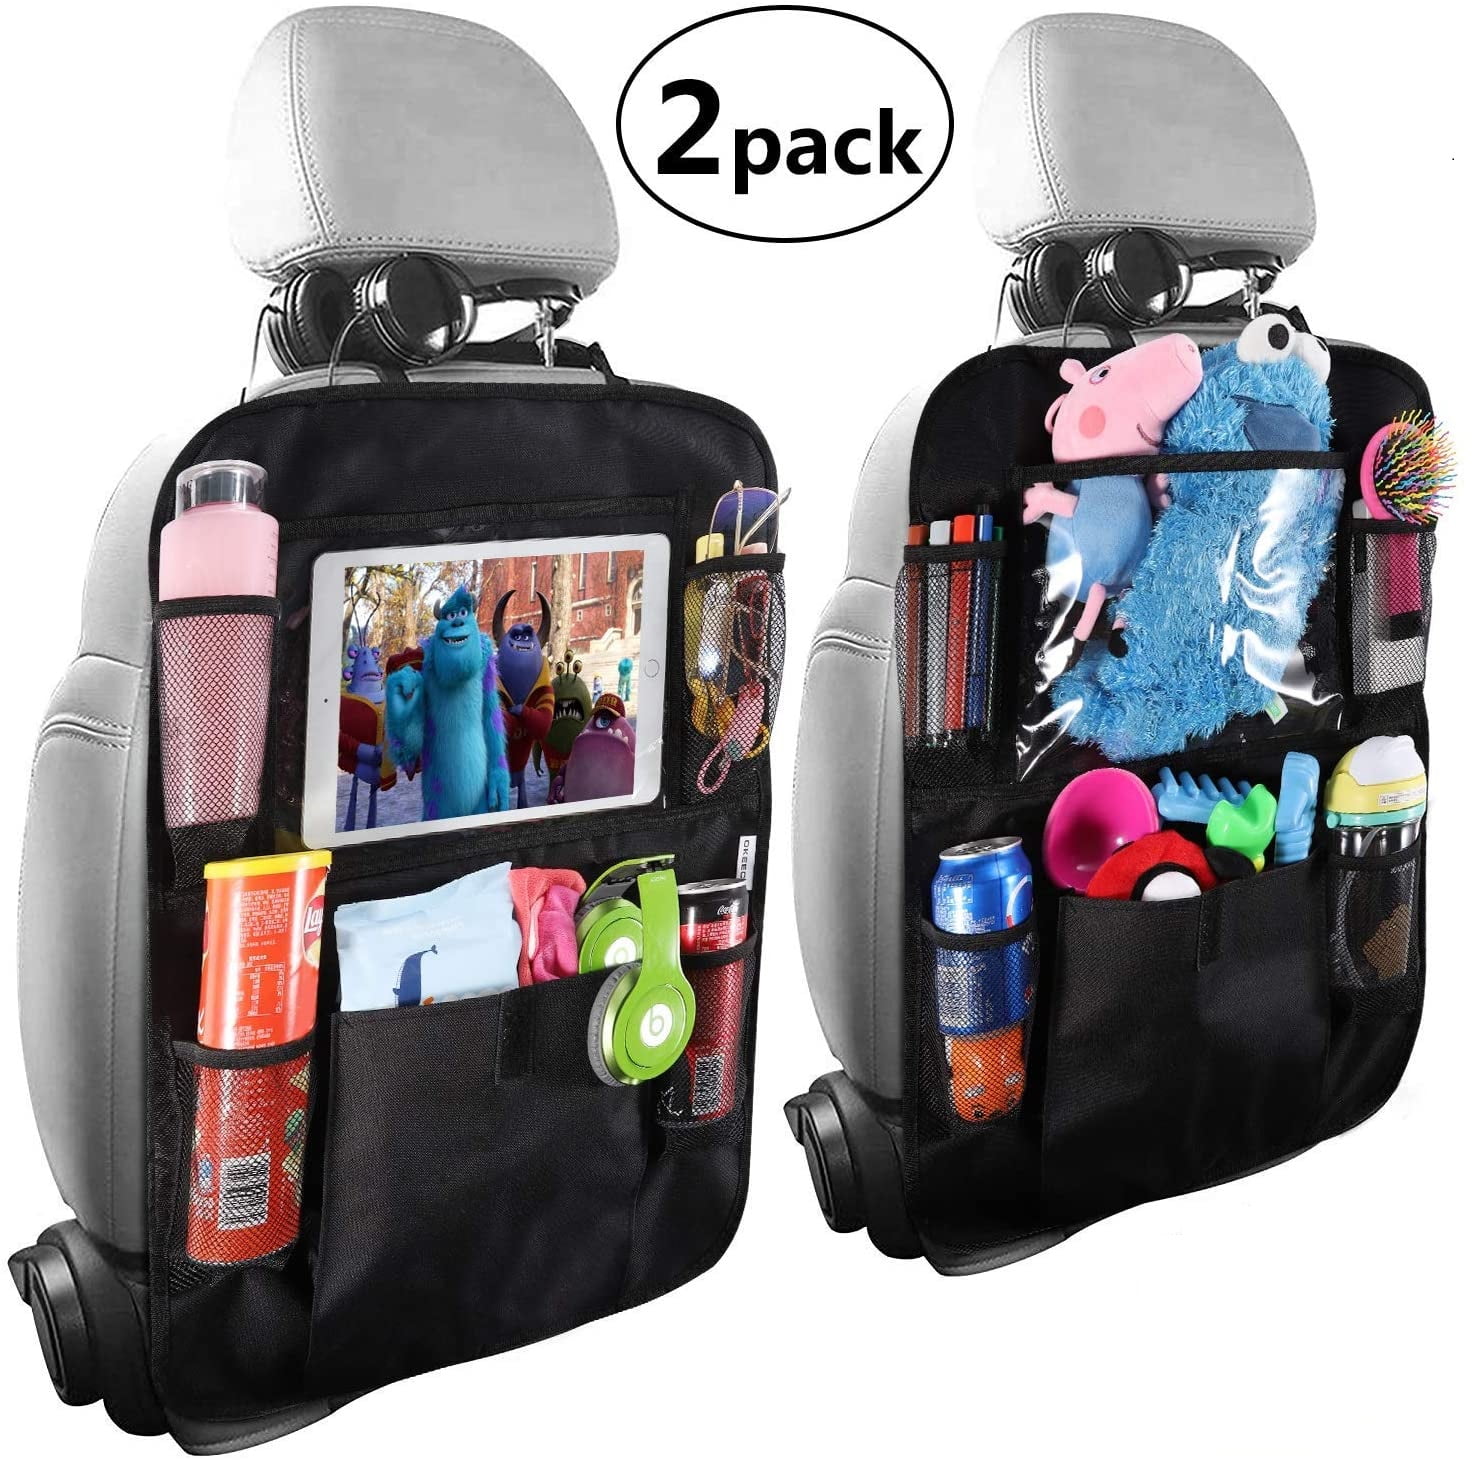 HUGS IDEA 2 Packs Car Seat Organizer Funny Cat Puzzle Printed Car Seat Back Protection Cover with 3 Large Storage Pockets Travel Accessories 